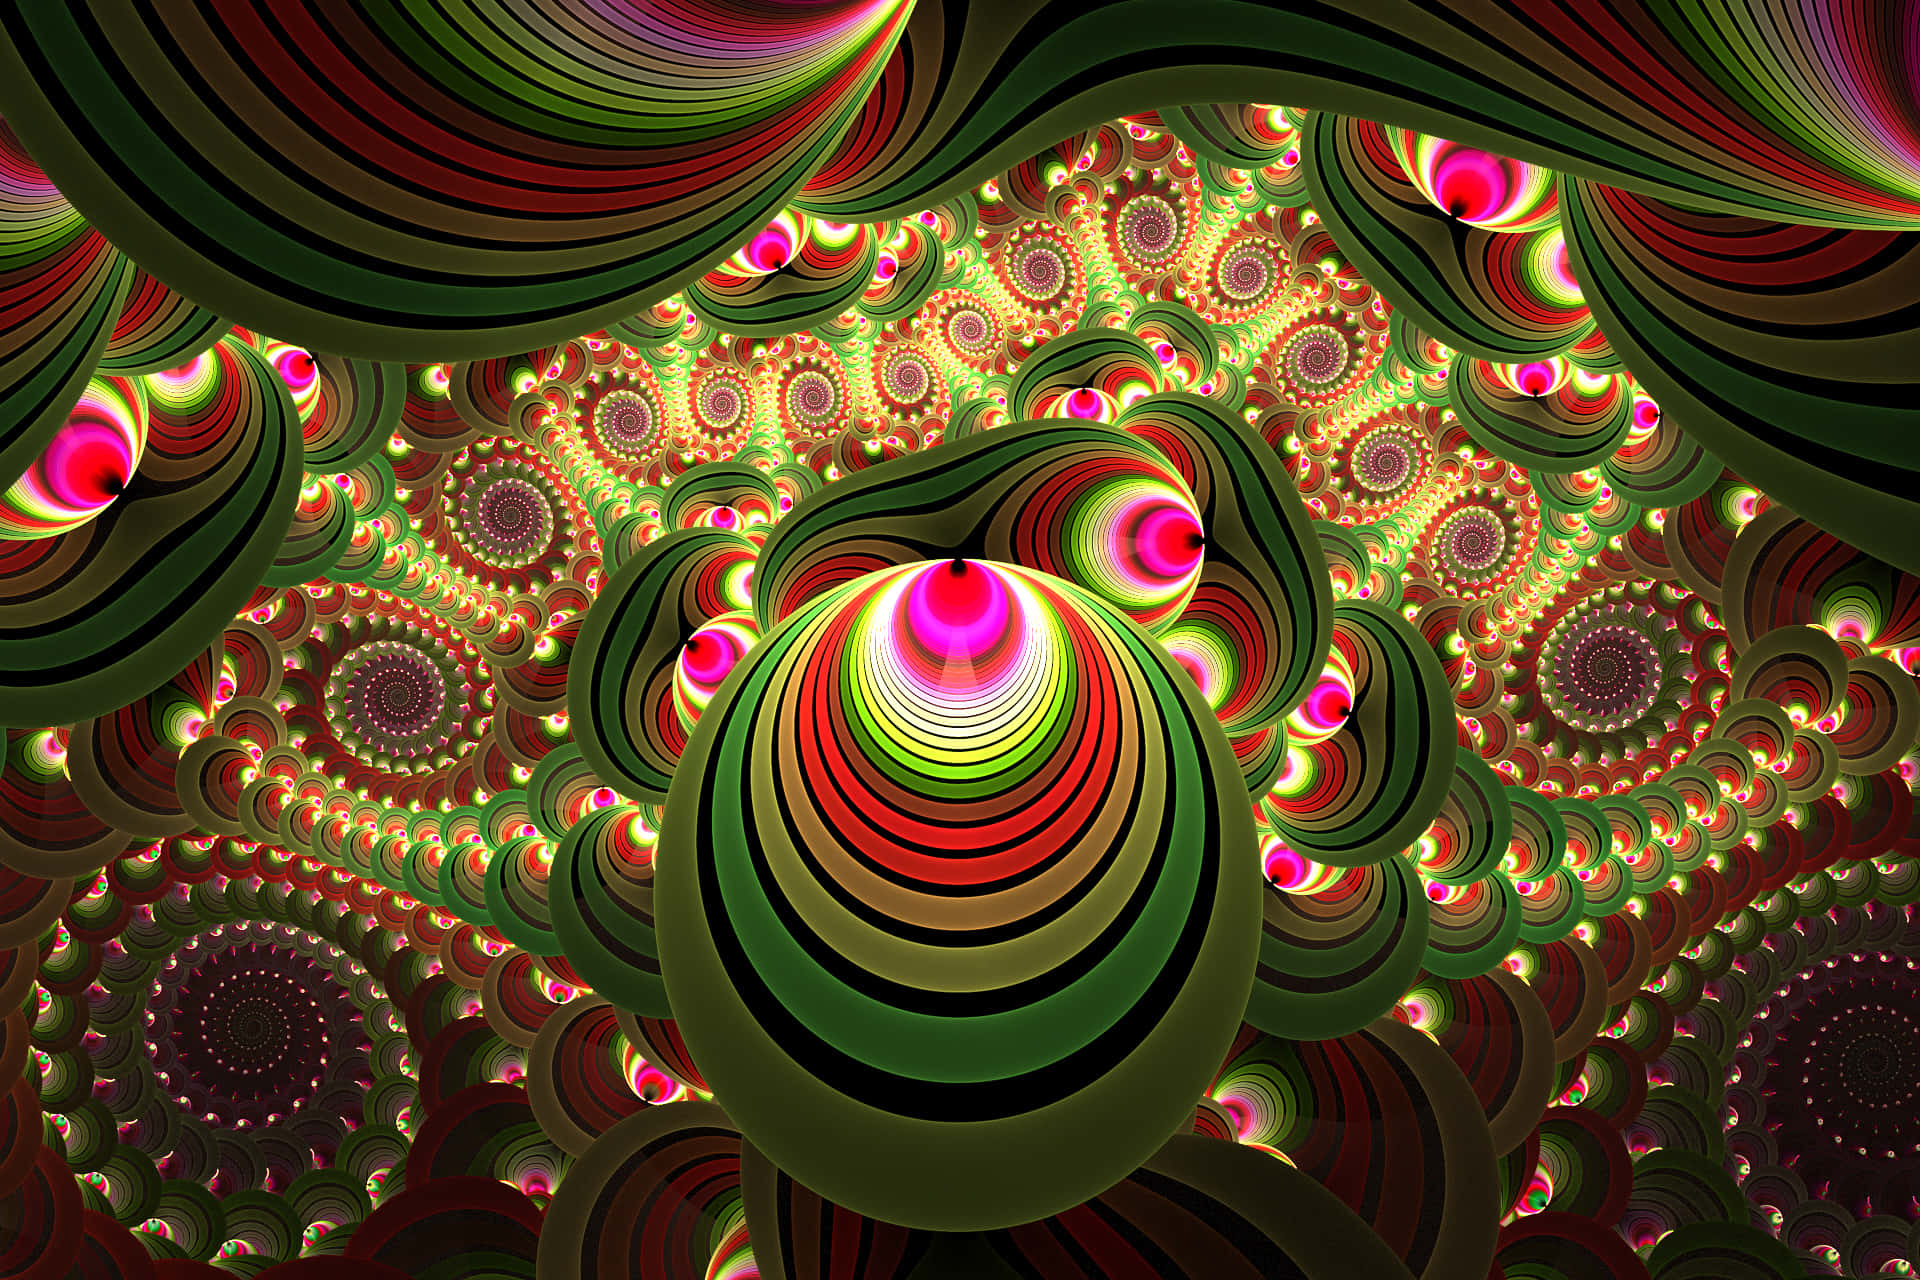 A Colorful Fractal Art Design With A Red And Green Background